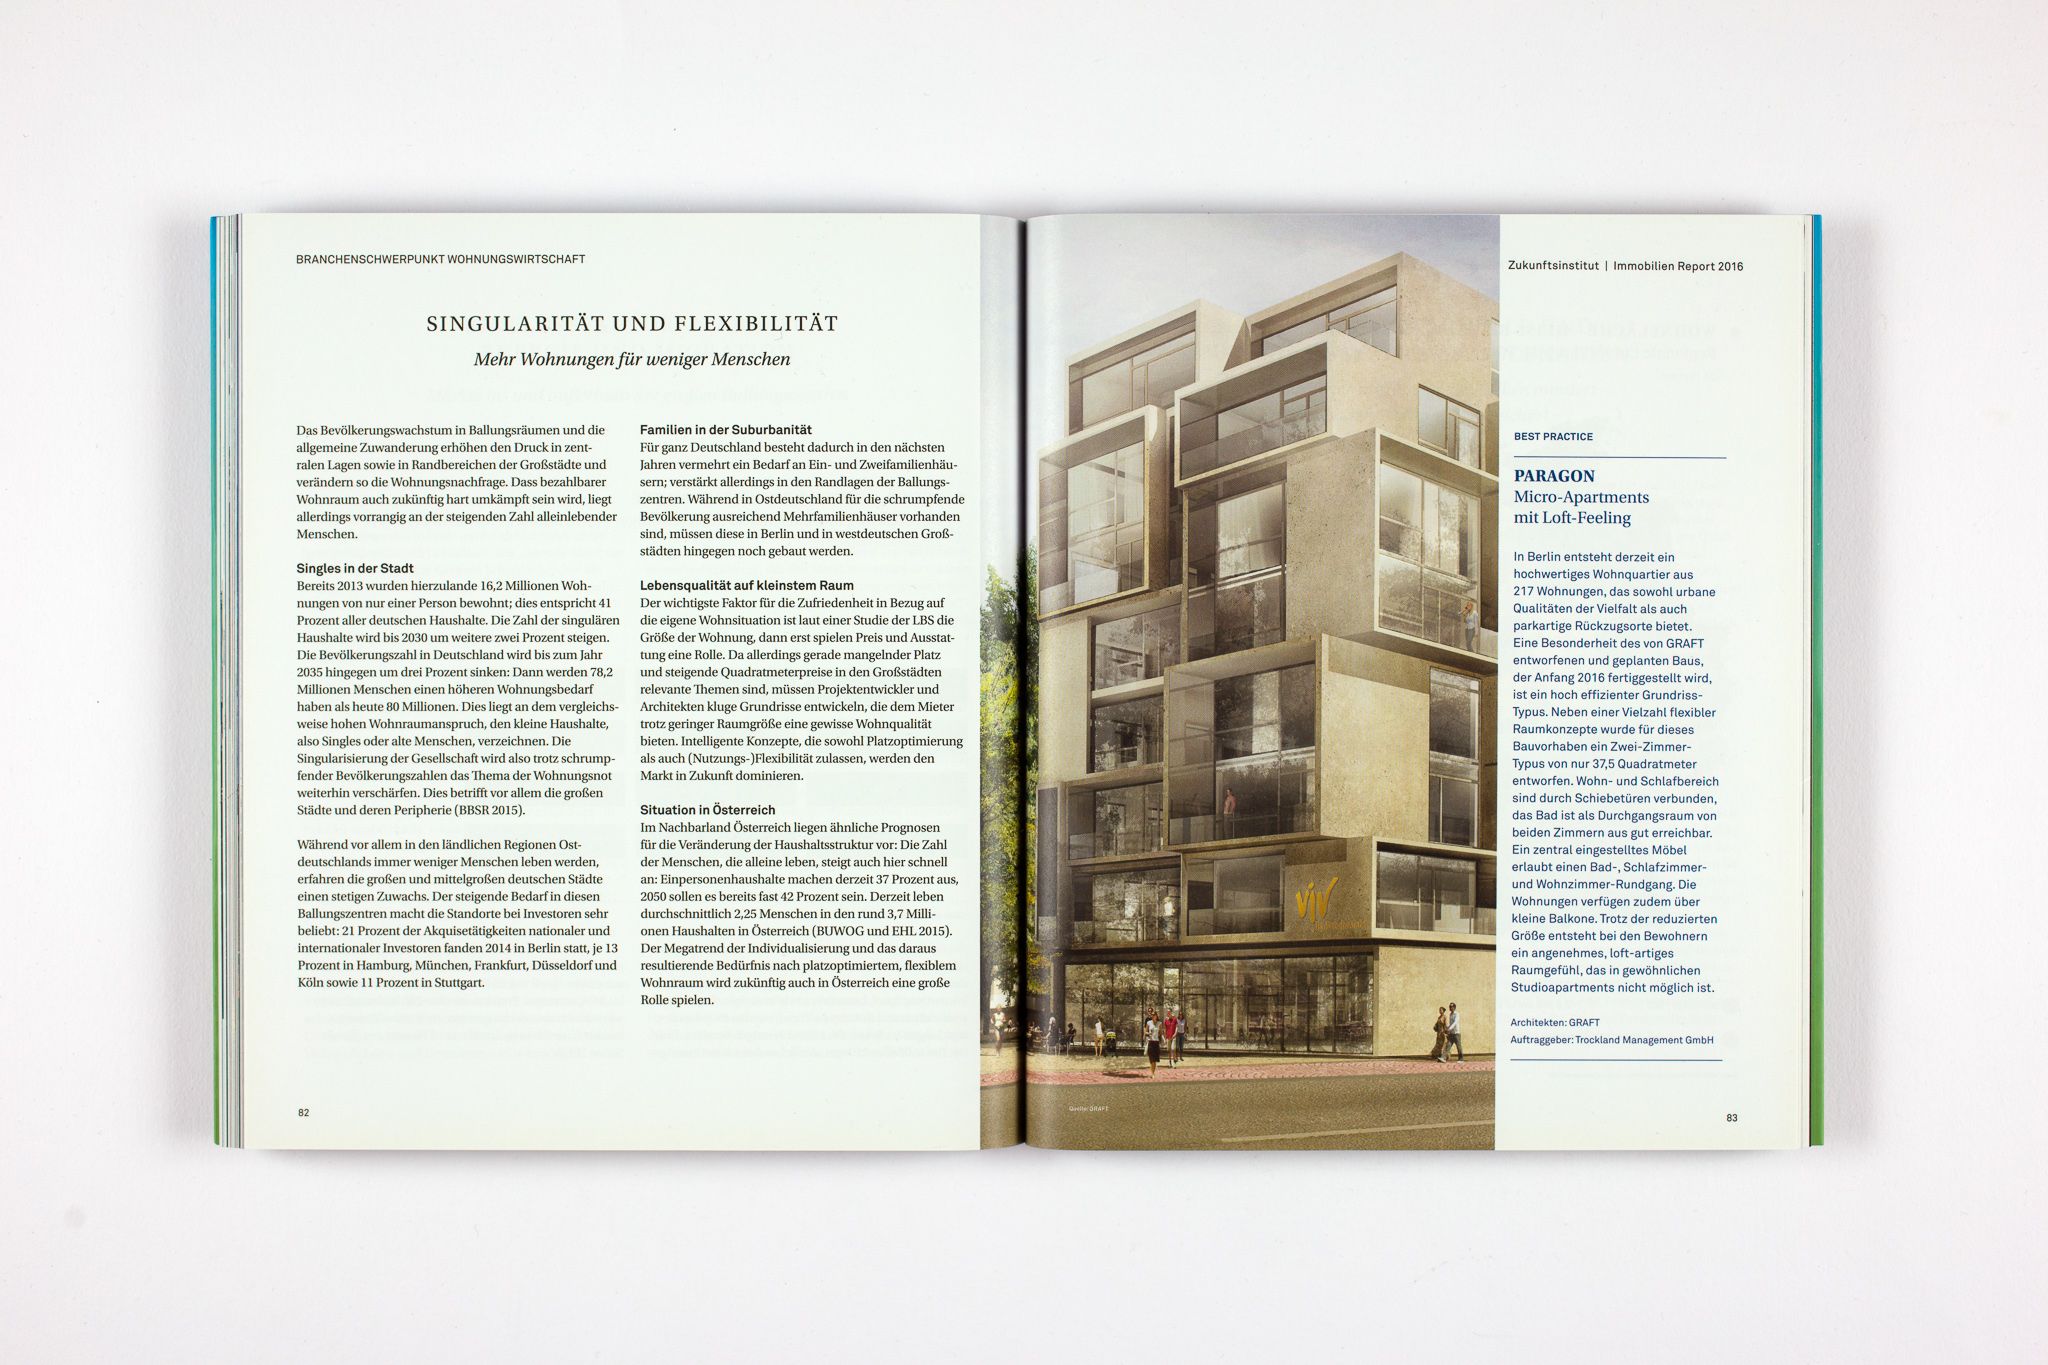 Immobilien Report 2016 – Communicating Architecture